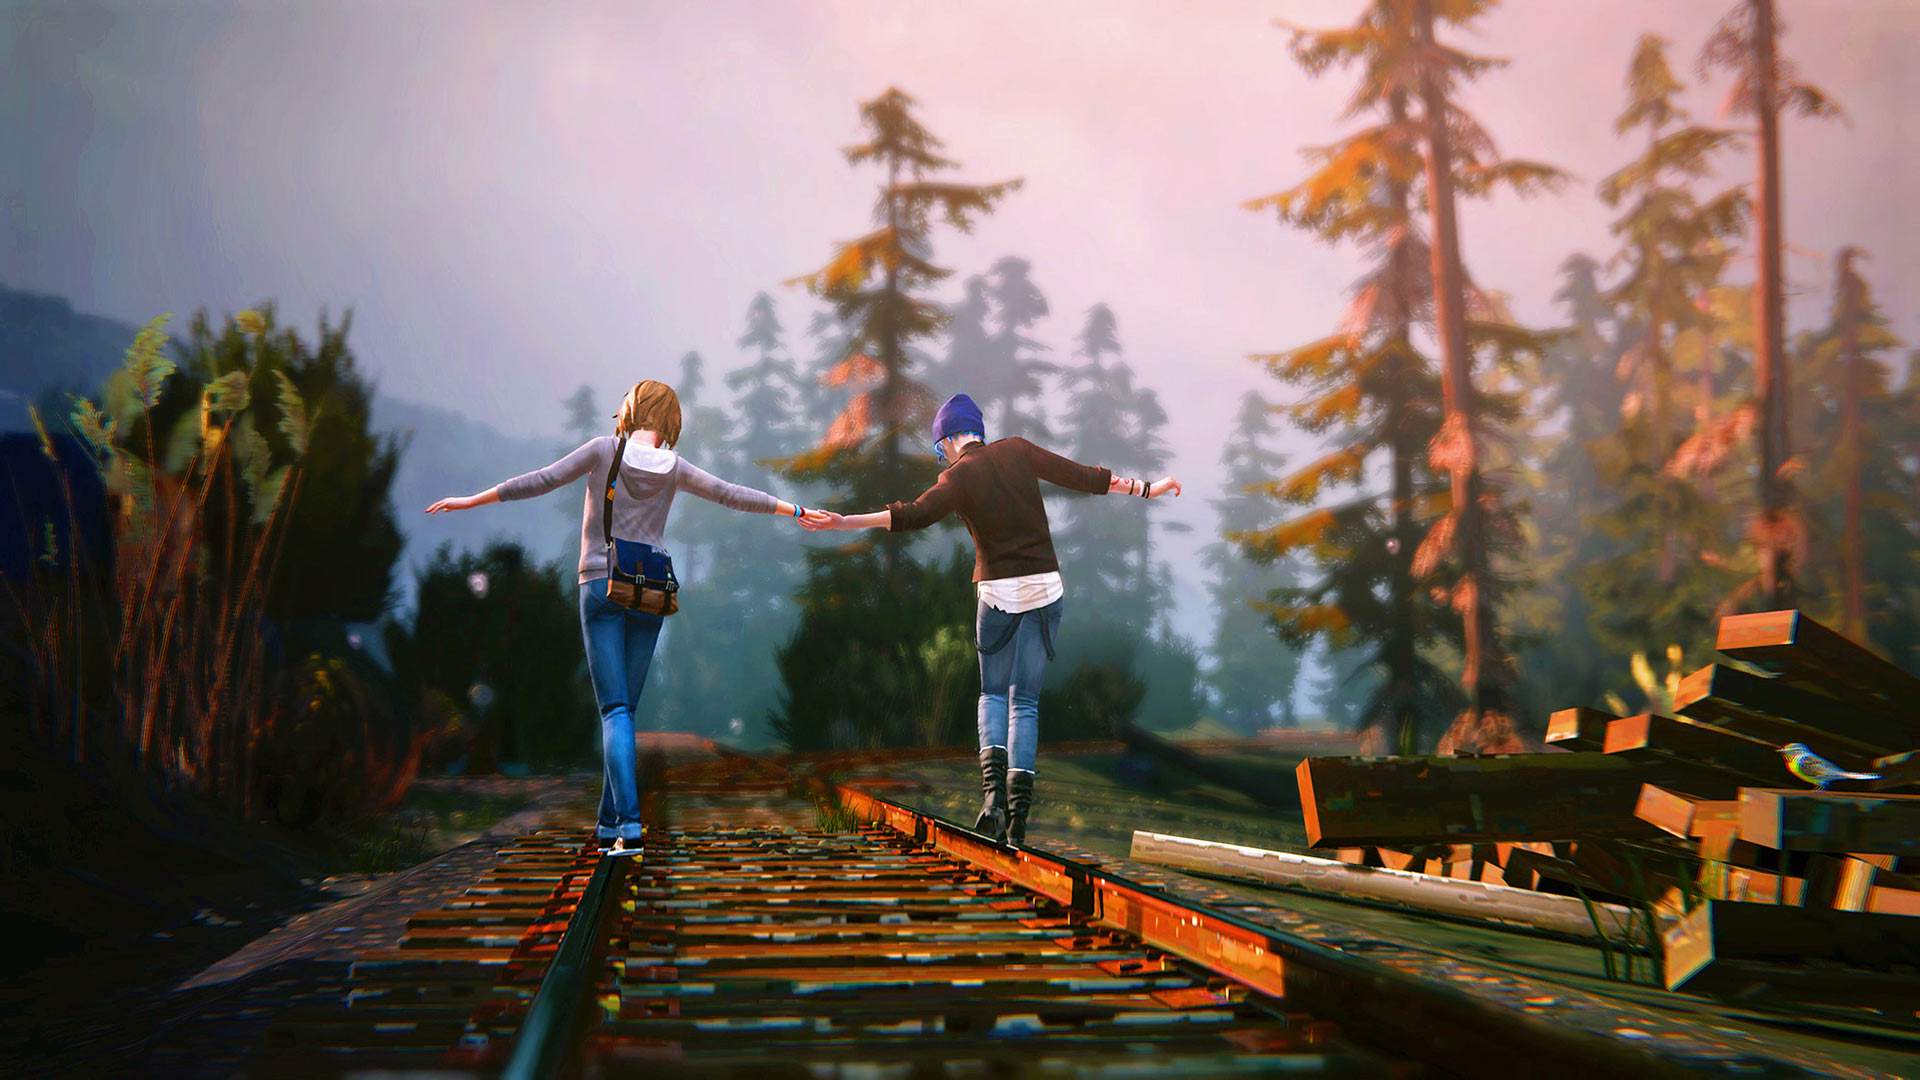 Max and Chloe, hand in hand, balance on rusted train tracks. The golden afternoon sun shines on the forest around them.